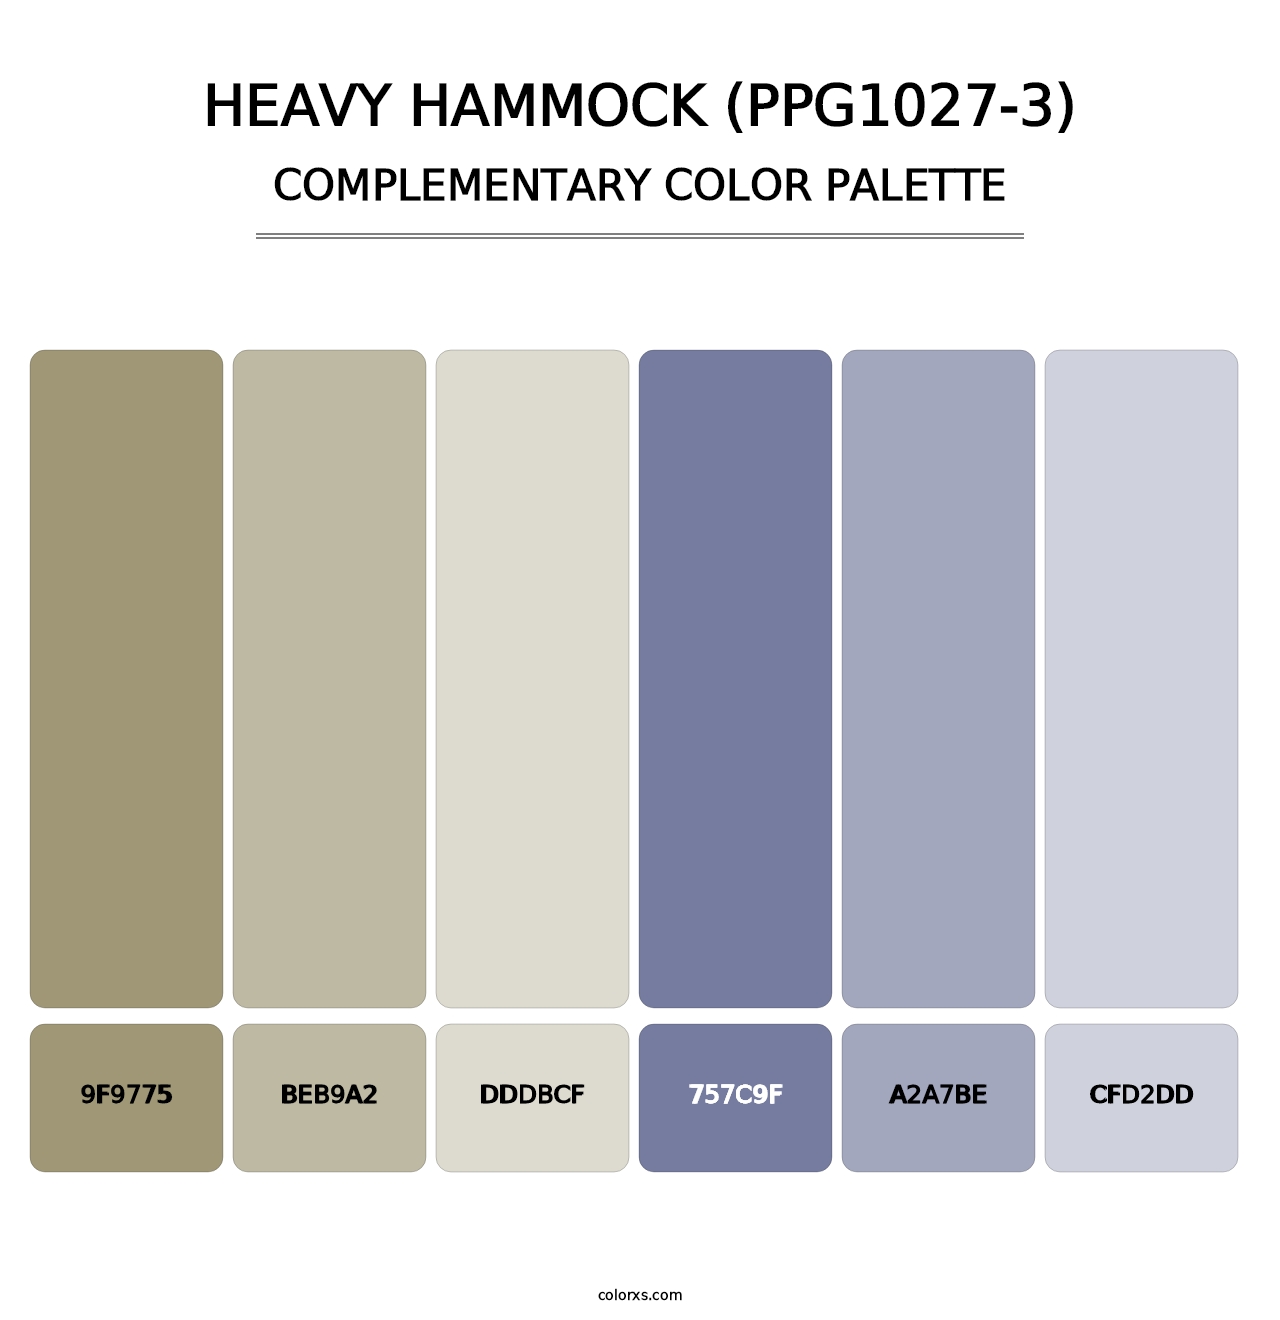 Heavy Hammock (PPG1027-3) - Complementary Color Palette